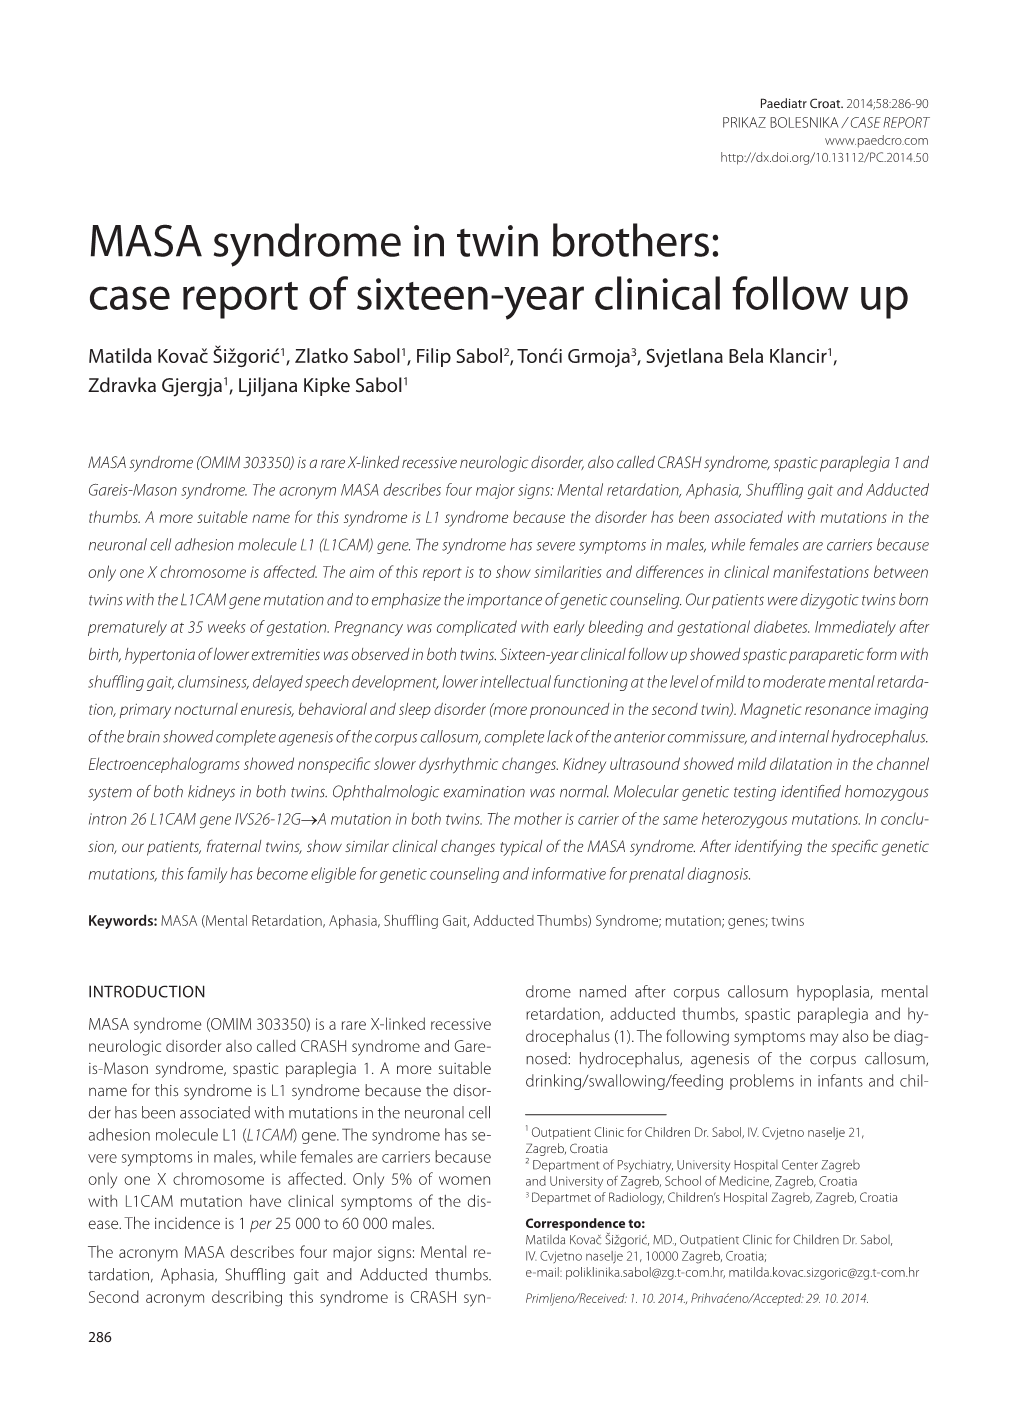 MASA Syndrome in Twin Brothers: Case Report of Sixteen-Year Clinical Follow Up